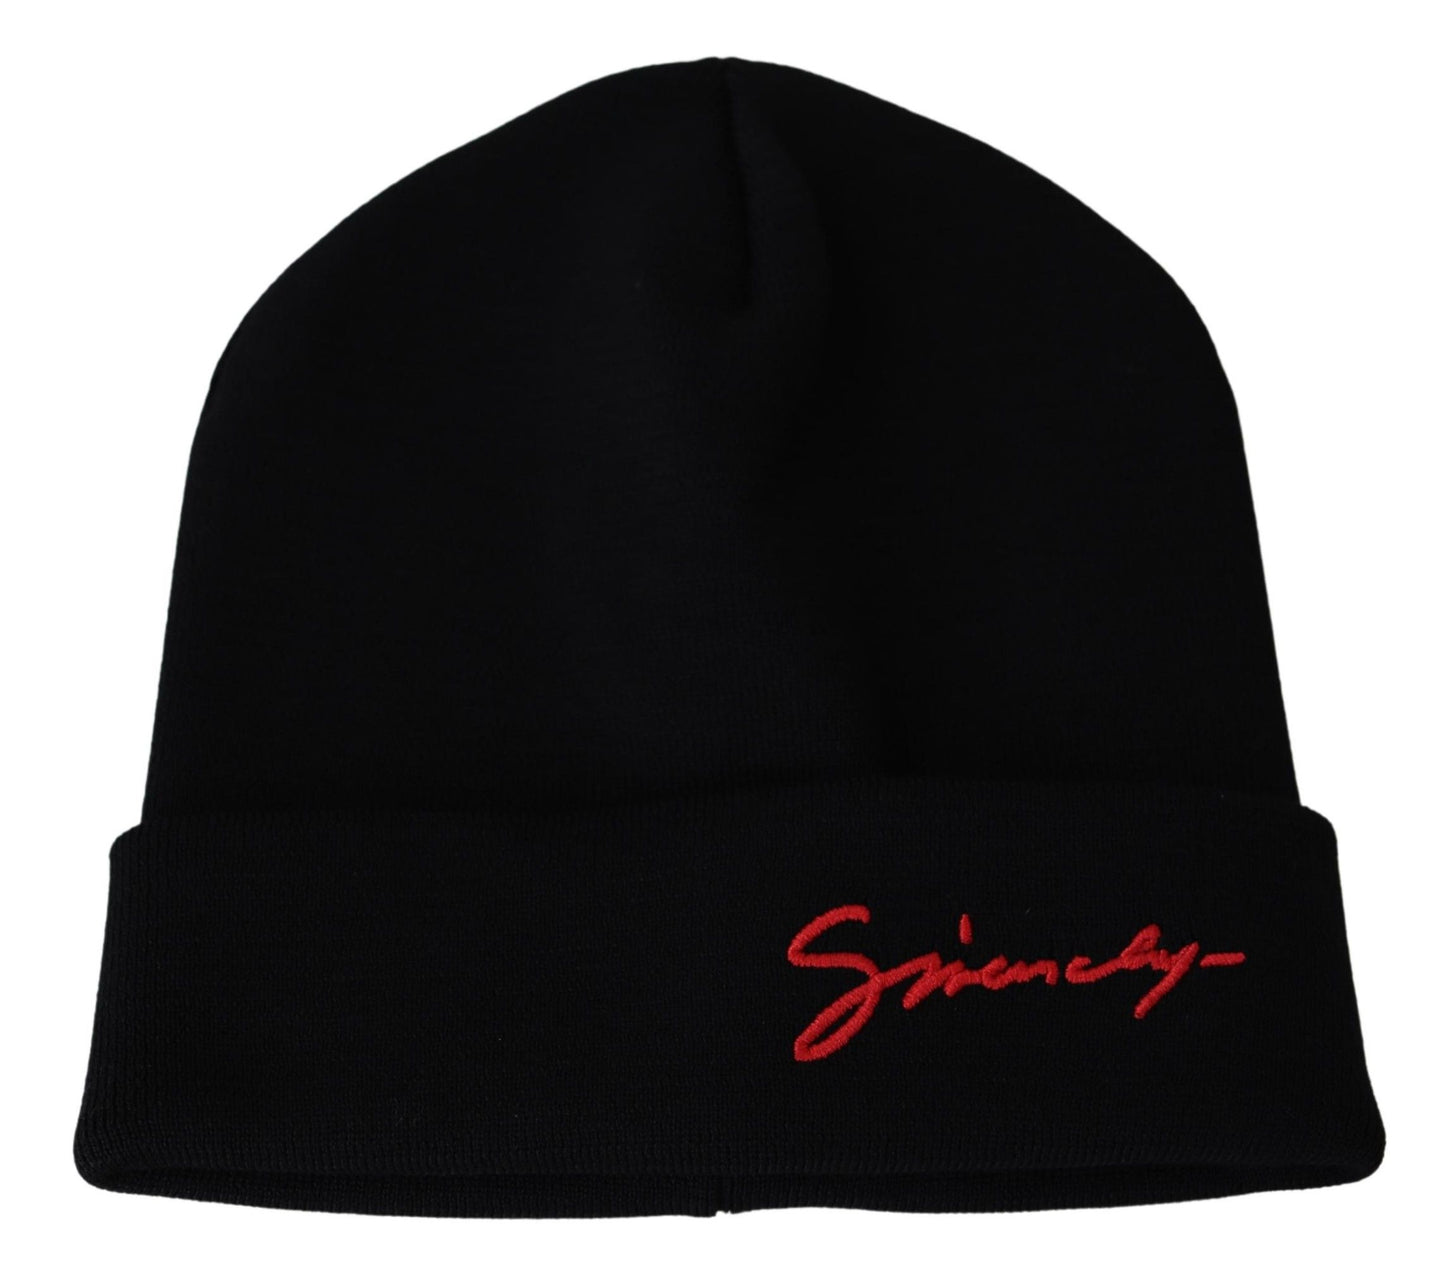 Givenchy Black Wool Unisex Winter Warm Beanie Hat - Designed by Givenchy Available to Buy at a Discounted Price on Moon Behind The Hill Online Designer Discount Store